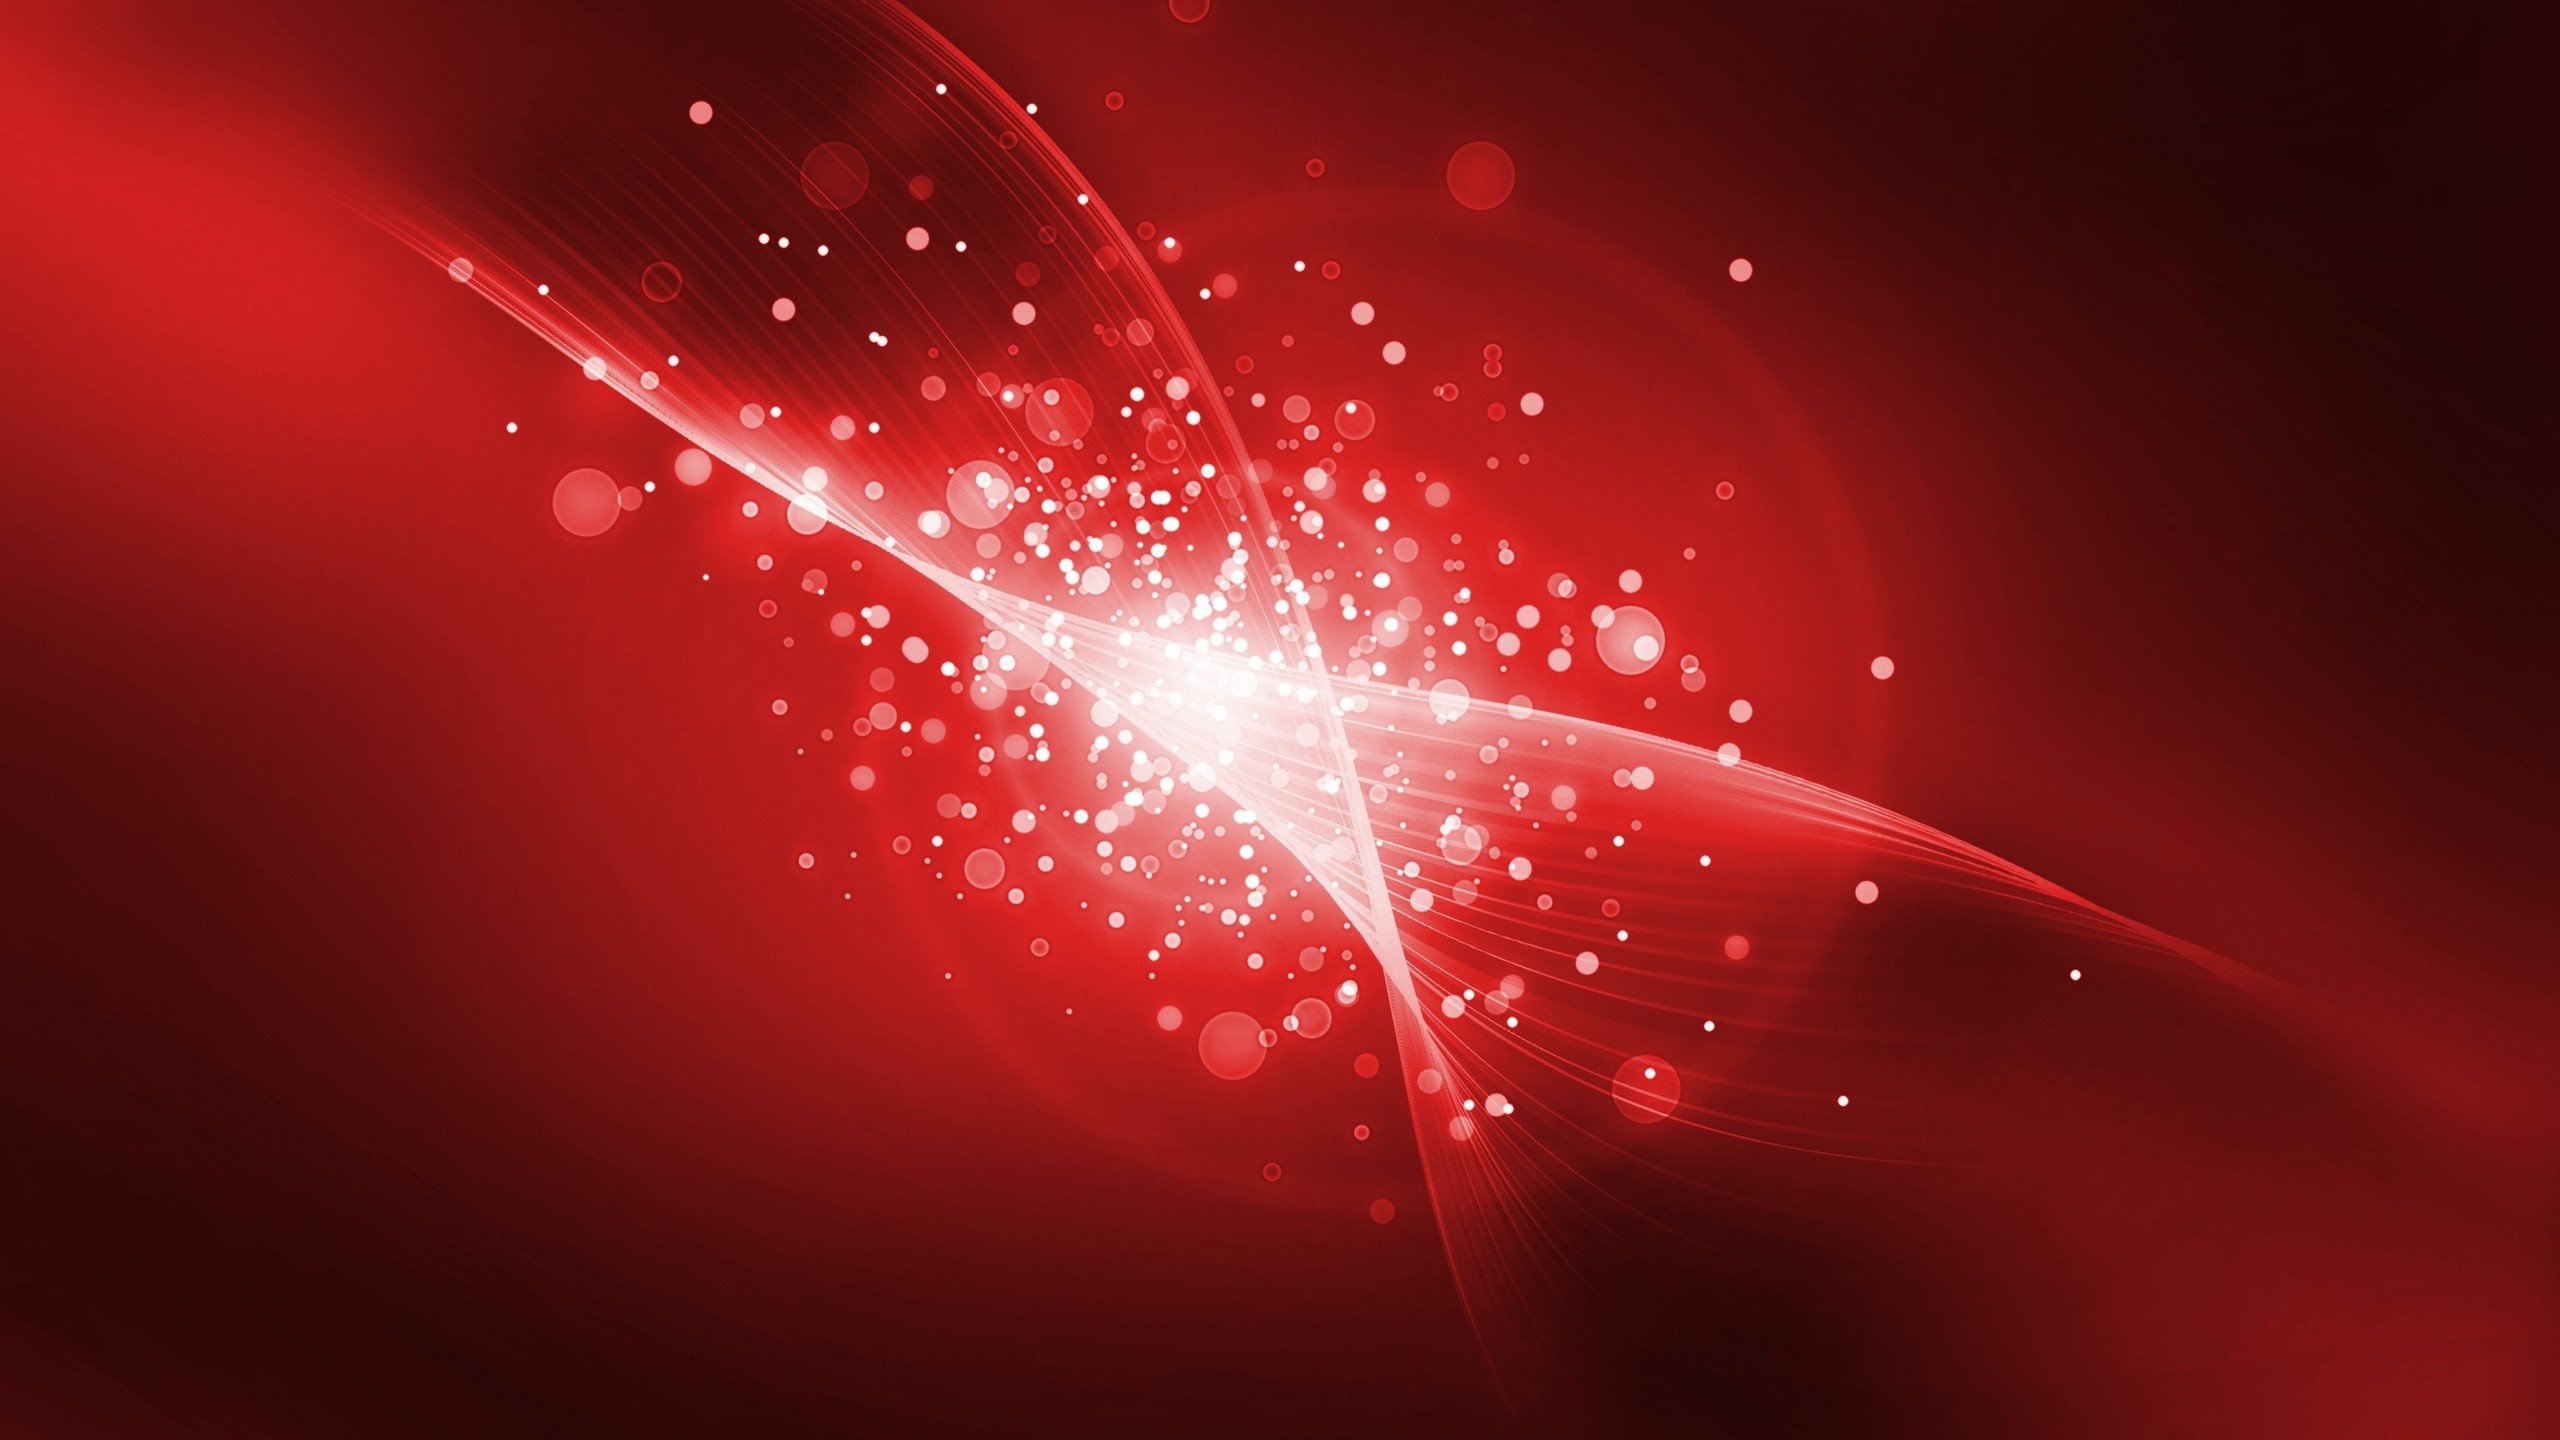 Abstract Red Wallpaper 2560x1440 Abstract Red Wall